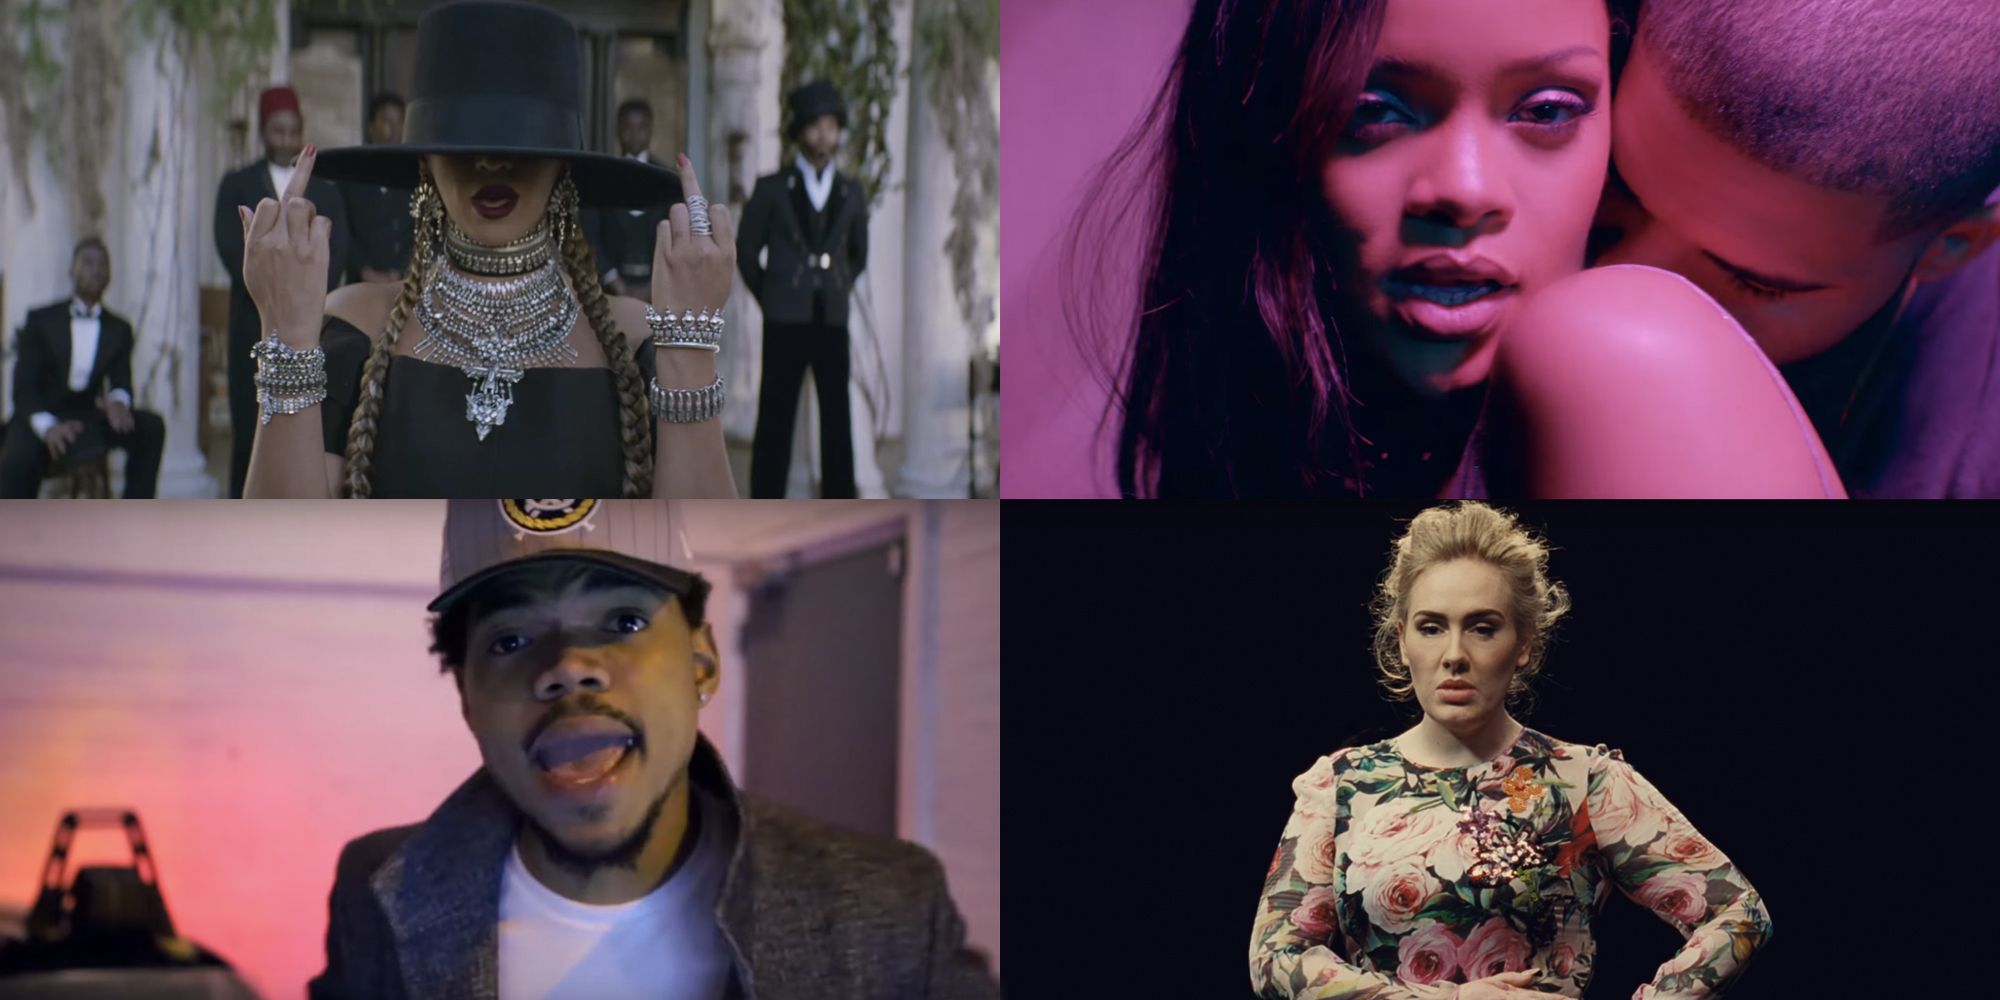 The Biggest Songs Of 2016 So Far - Songs That Defined 2016